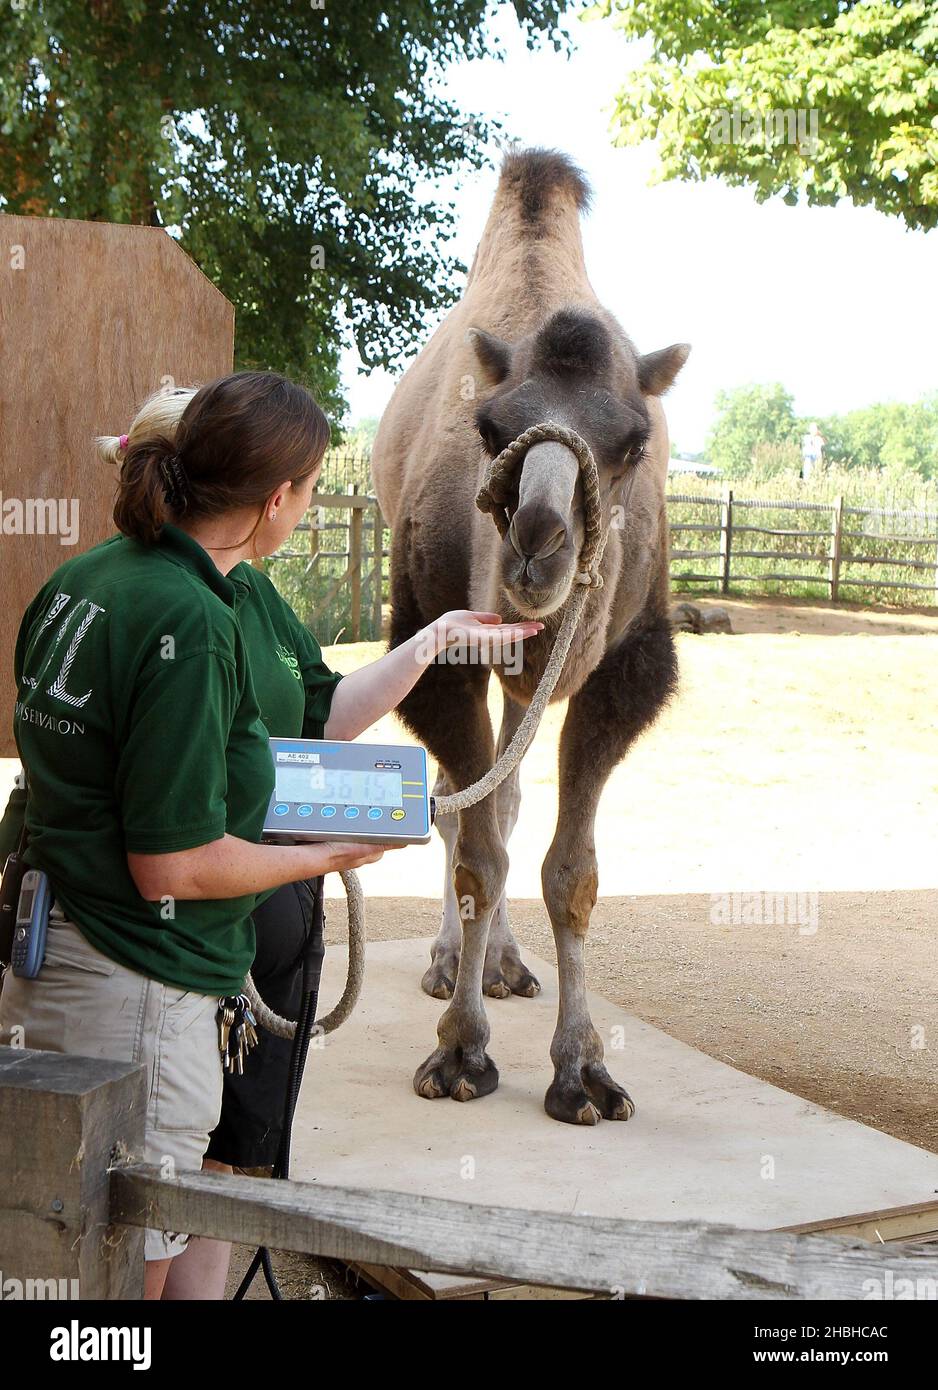 Gengkis, the Camel, stands on a set of electronic scales during the annual stock take of weights and sizes, at the London Zoo in Regents Park in central London. Stock Photo